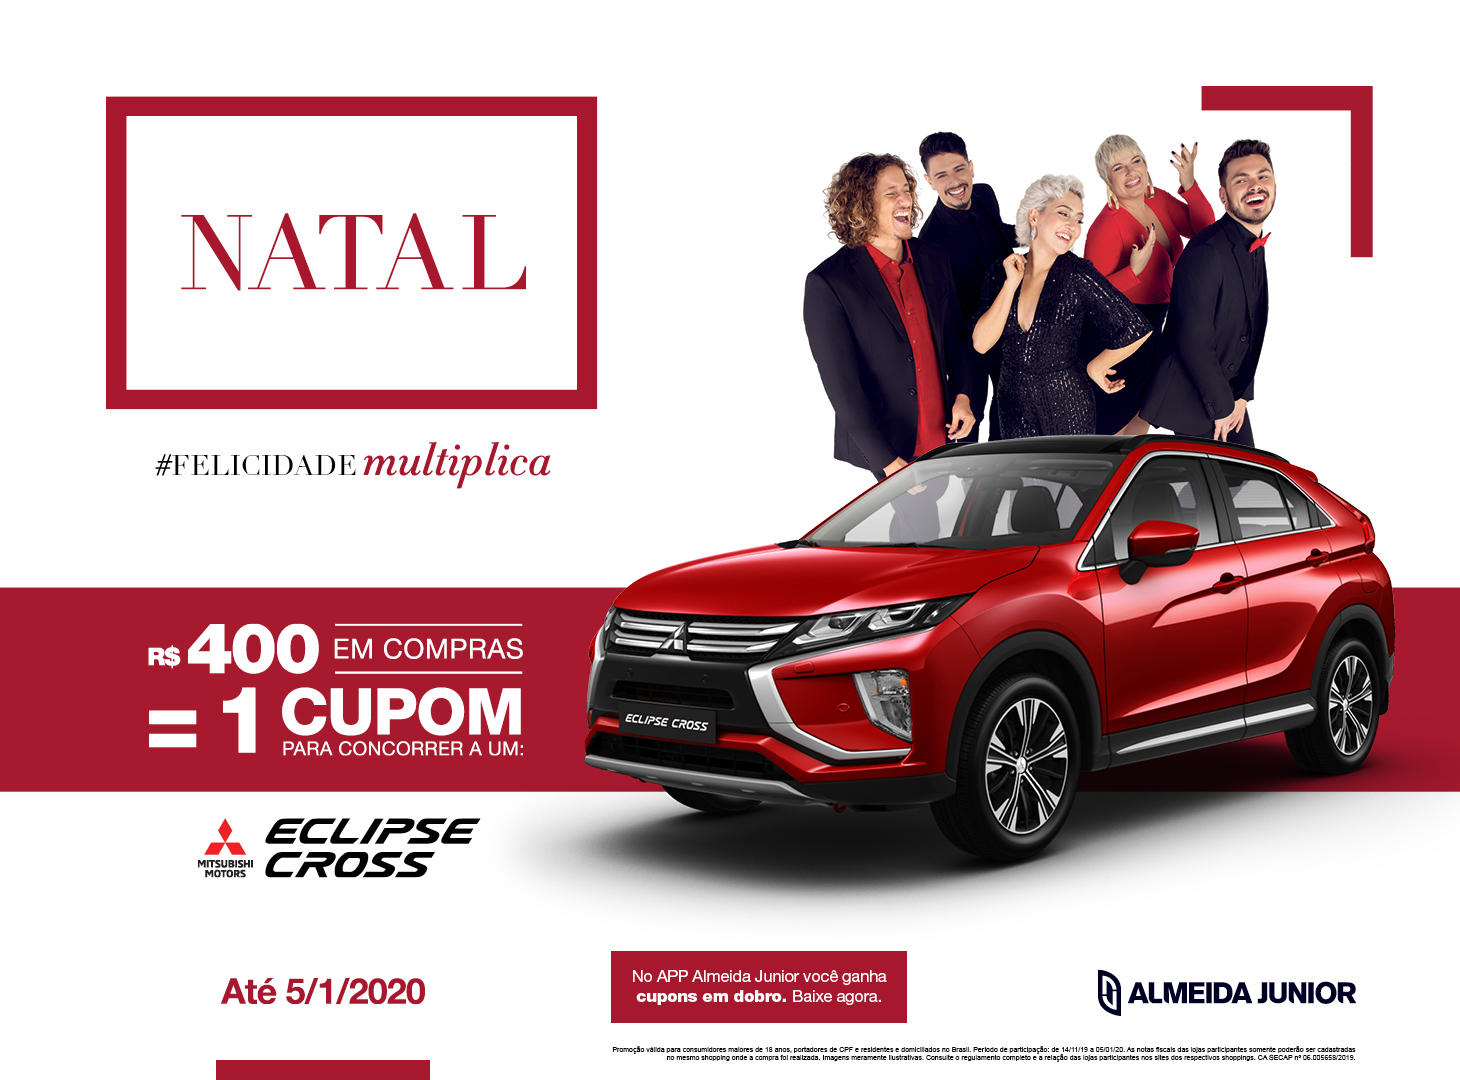 Christmas campaign values family and will give away six cars for customers